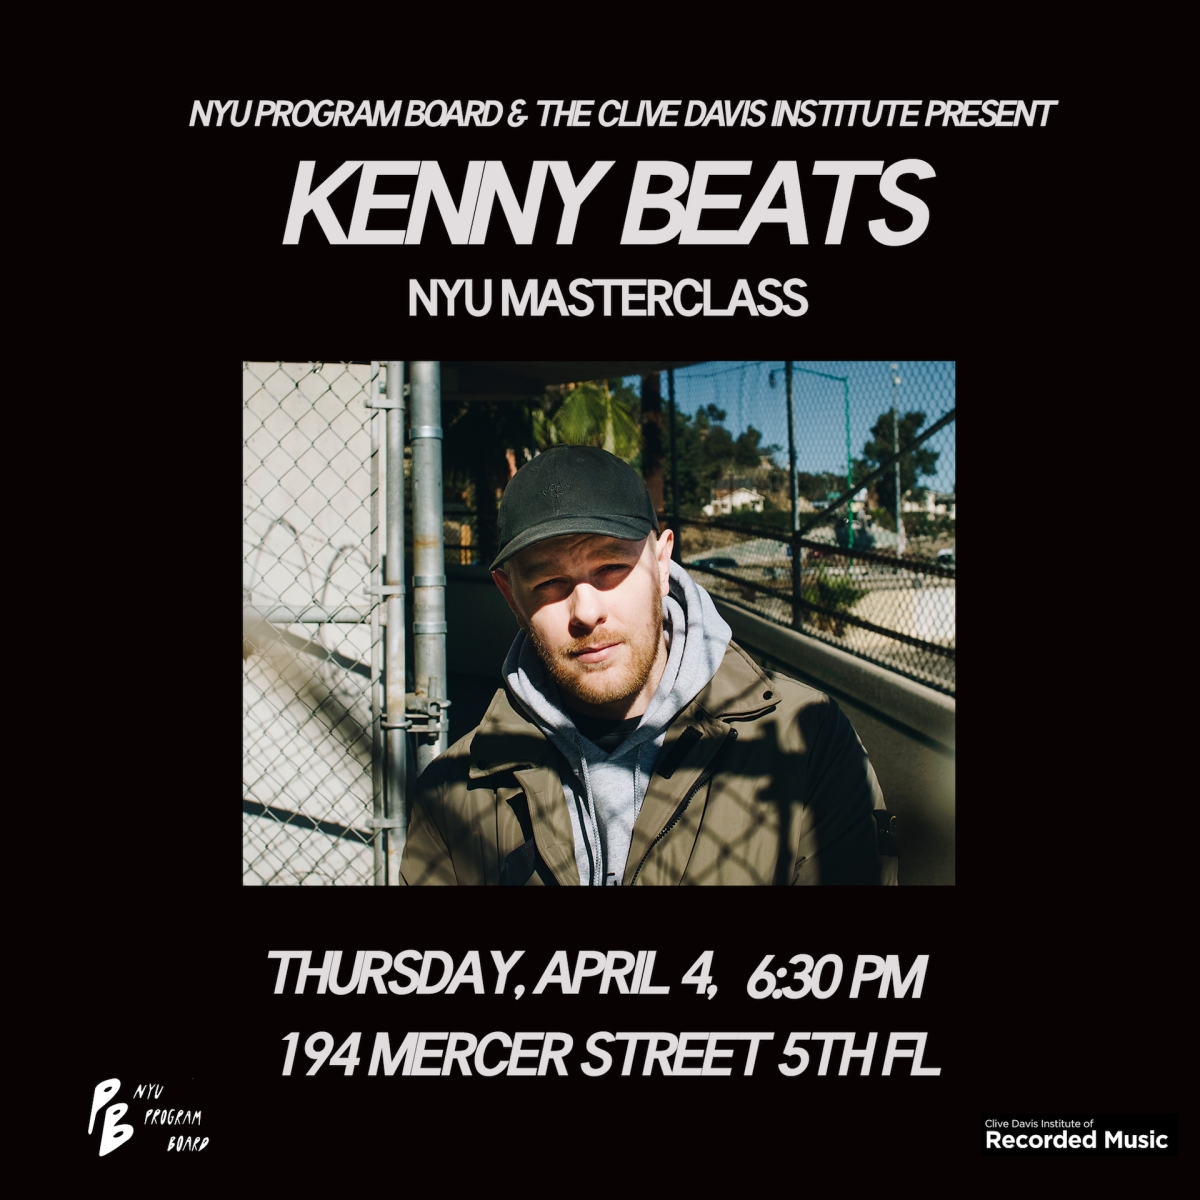 flyer for Kenny Beats masterclass event at NYU